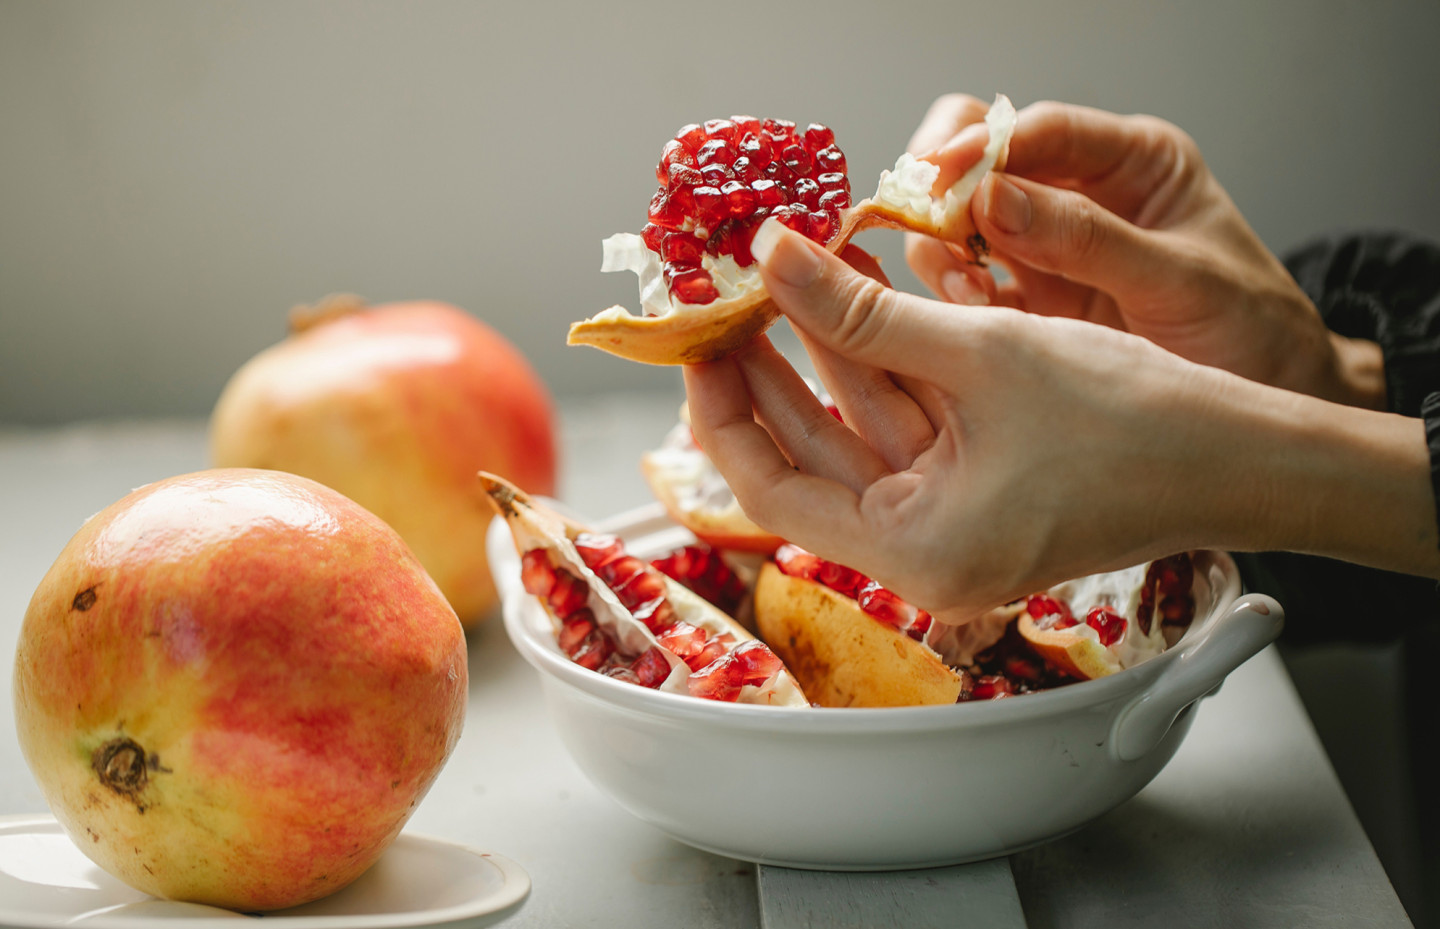 What are the benefits of pomegranate and is it possible to eat pomegranate with seeds?